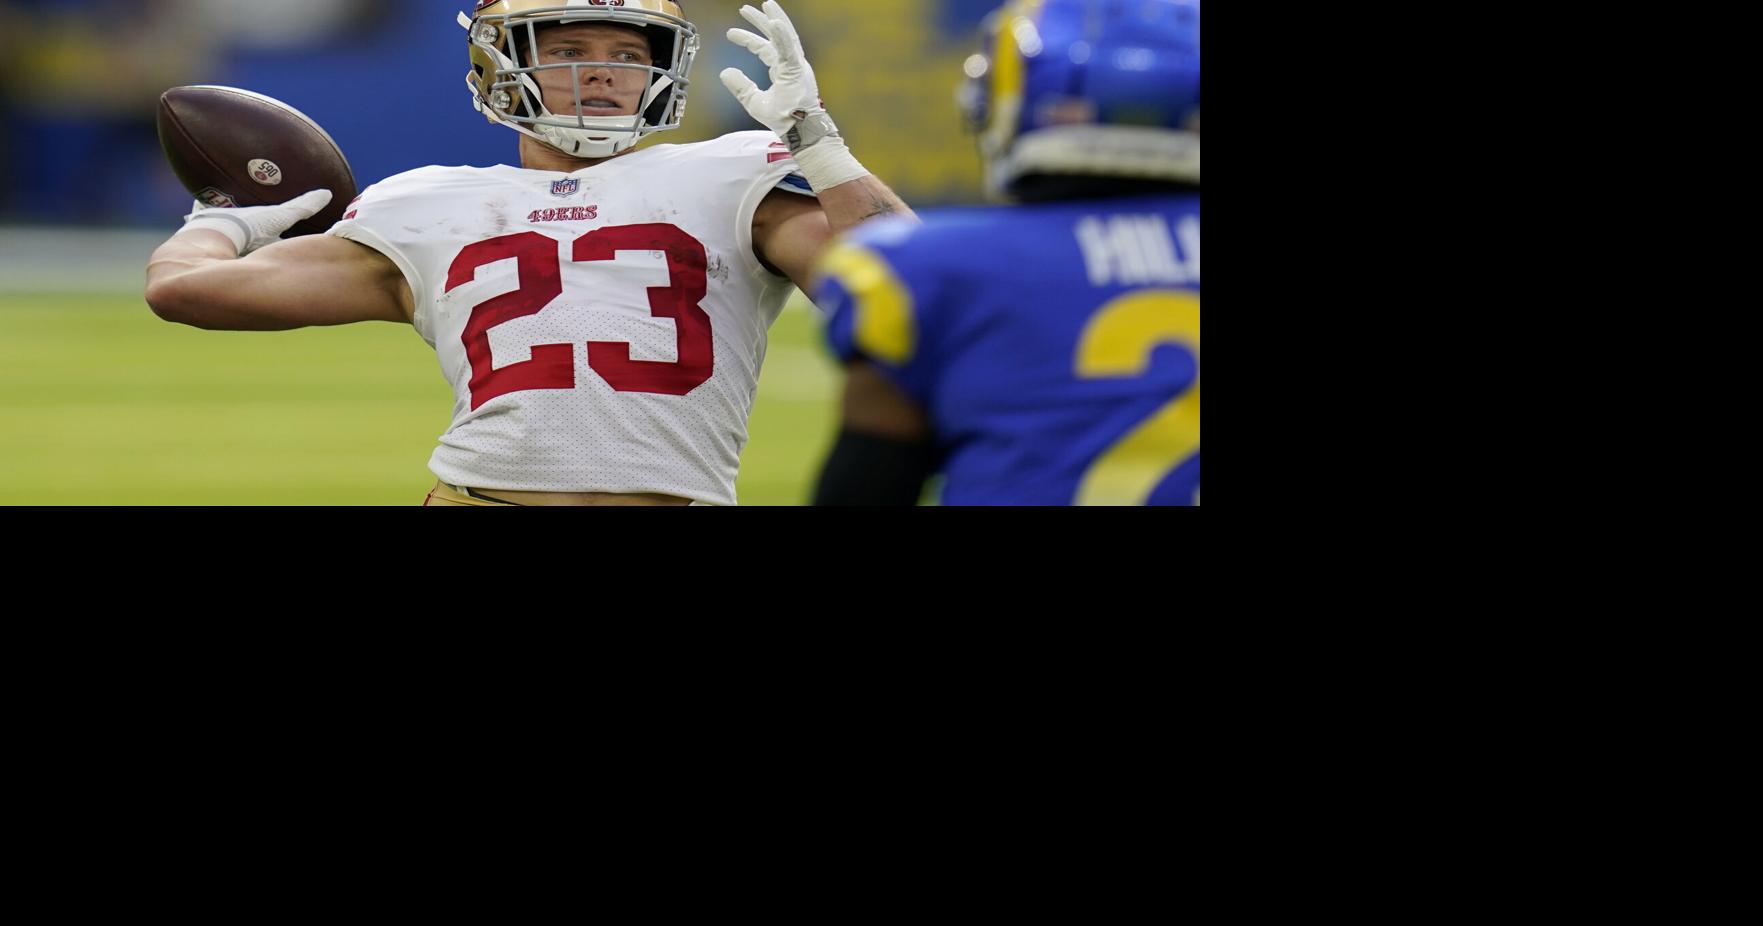 49ers-Rams live updates: McCaffrey passes, catches and runs for TDs